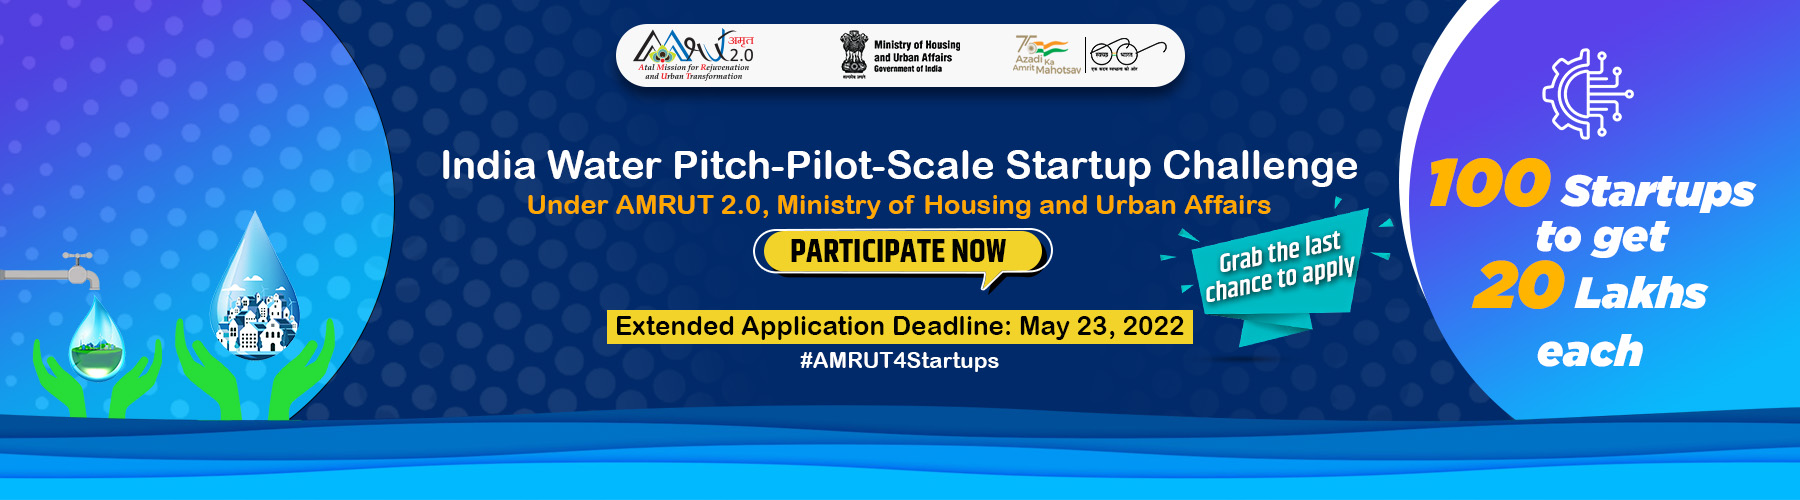 India Water Pitch-Pilot-Scale Start-up Challenge under AMRUT 2.0